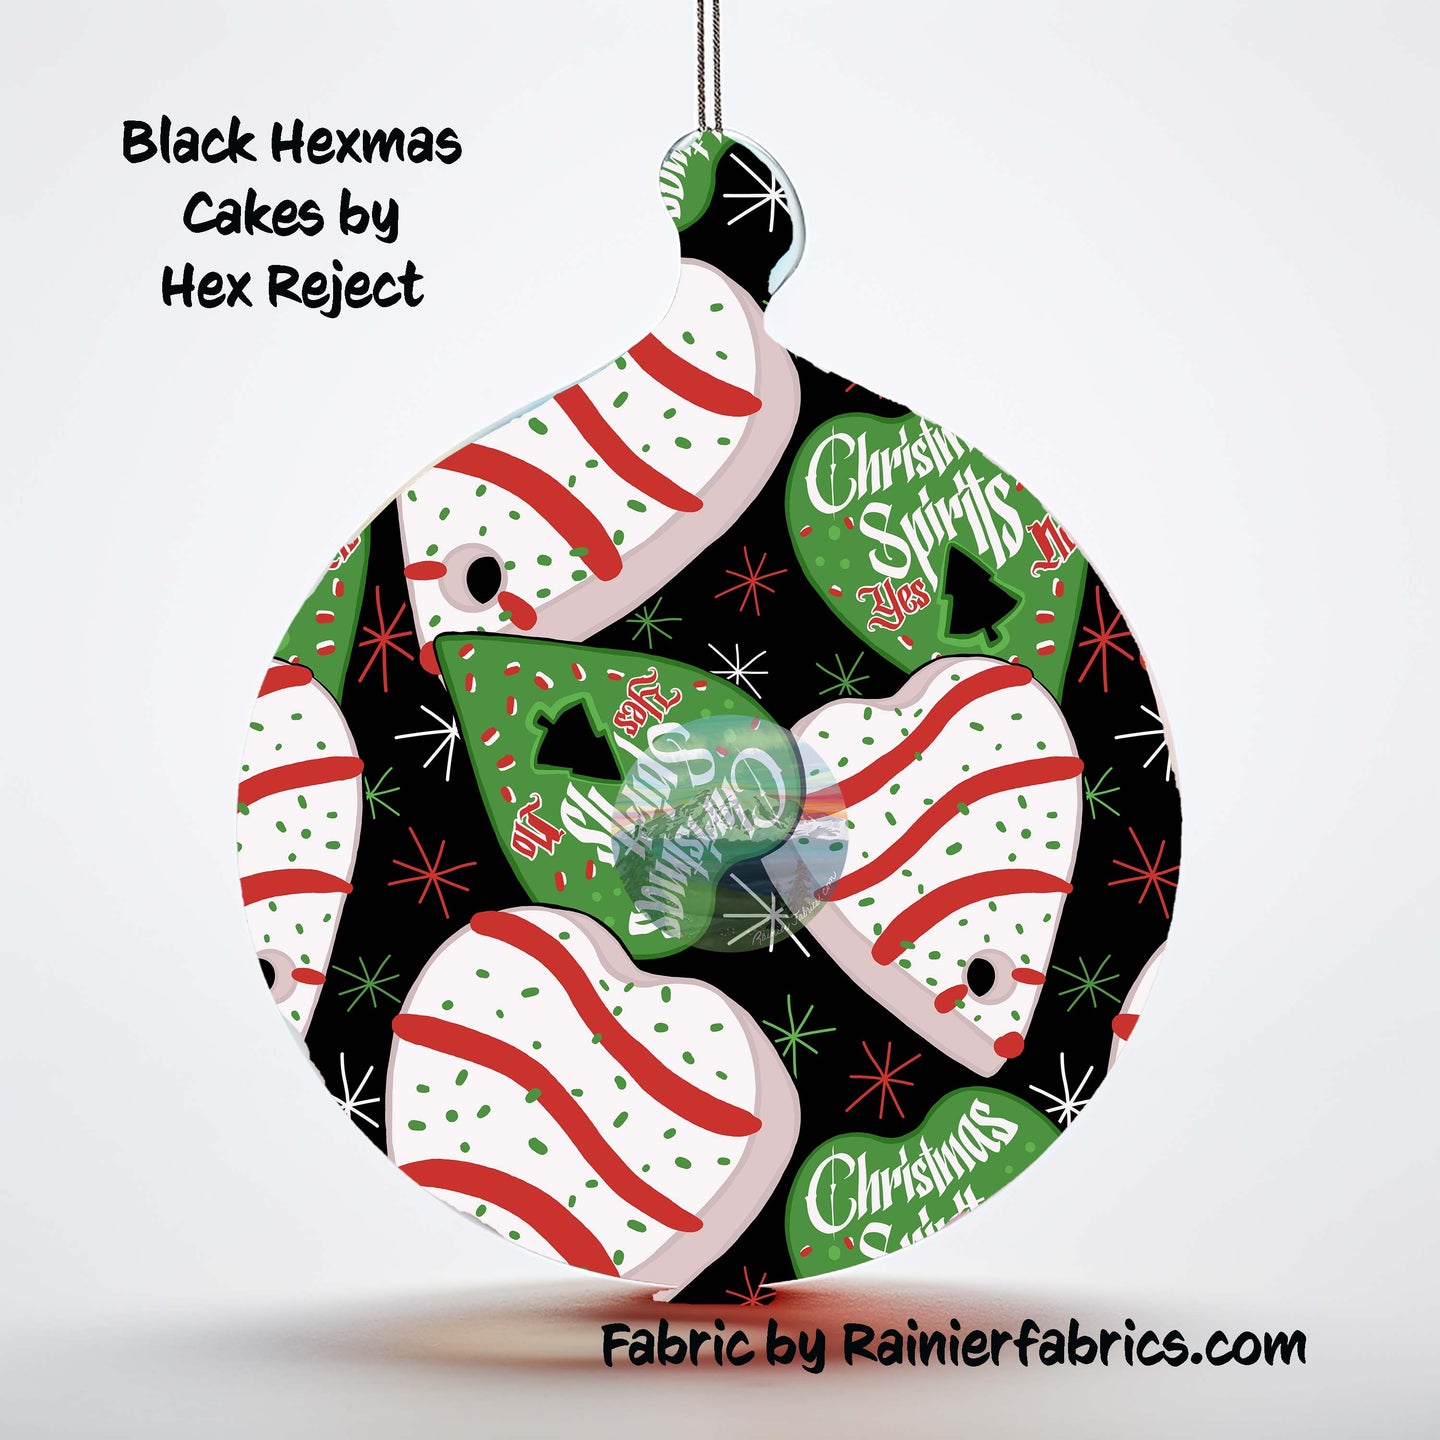 Black Hexmas Cakes - by Hex Reject